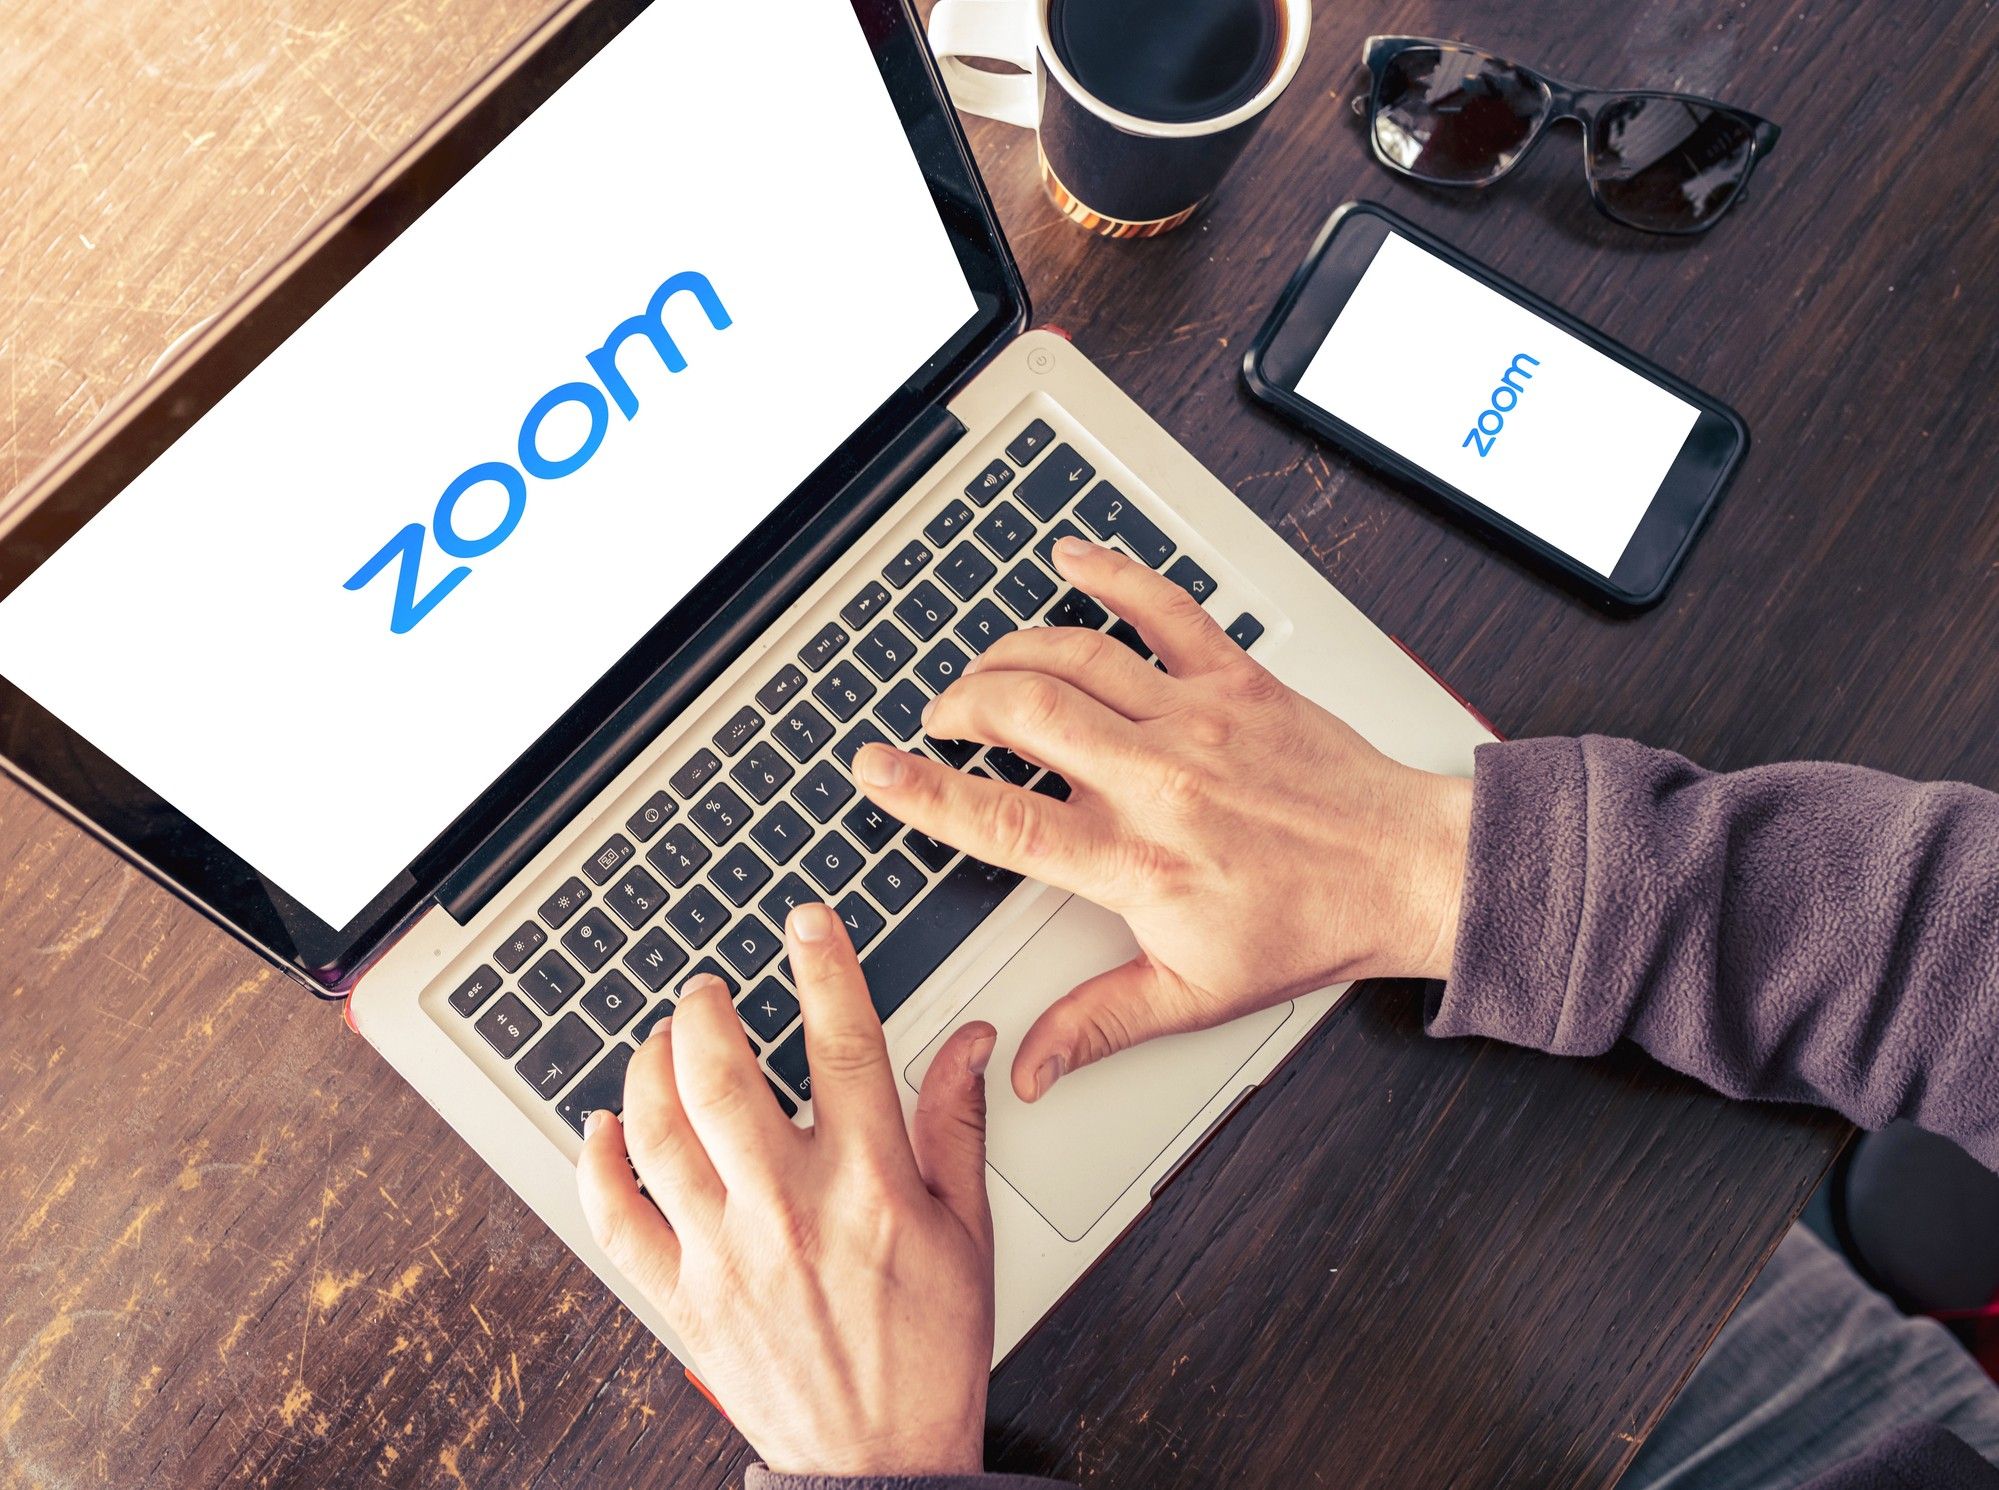 With the prevalence of remote work, Zoom security is a priority.